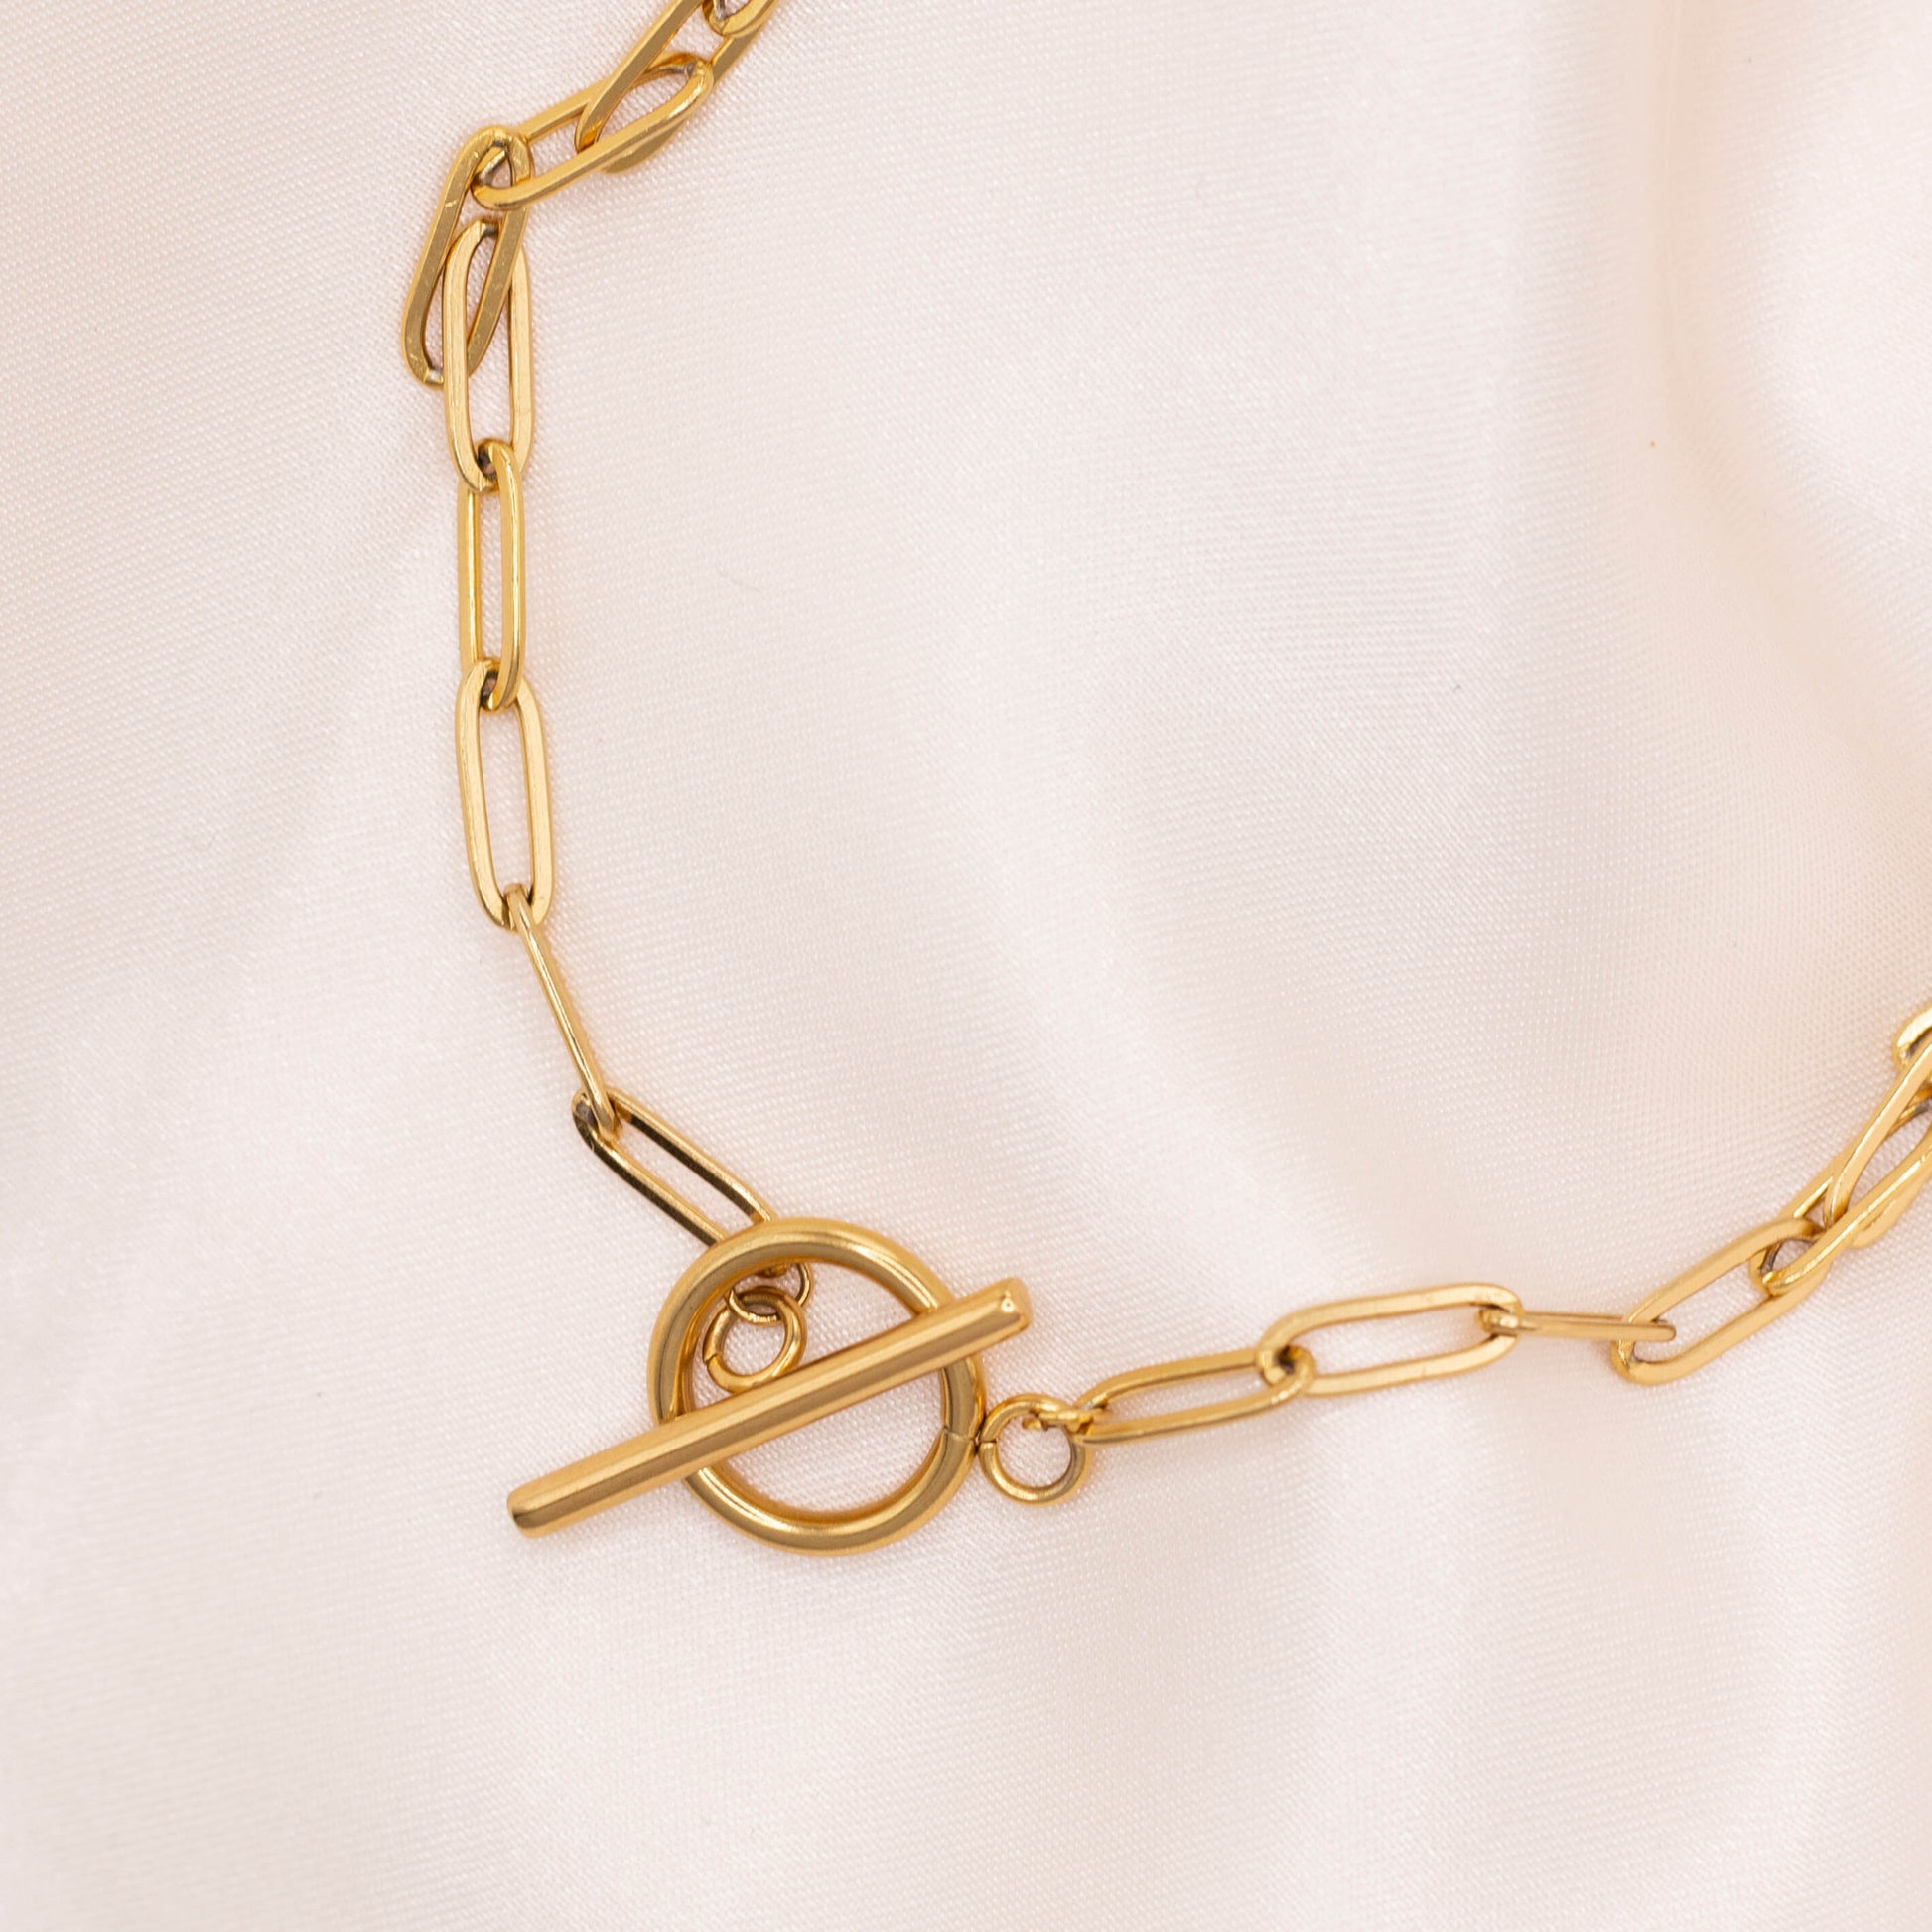 Toggle Clasp Paperclip Necklace with Gold-plated stianless steel chain.